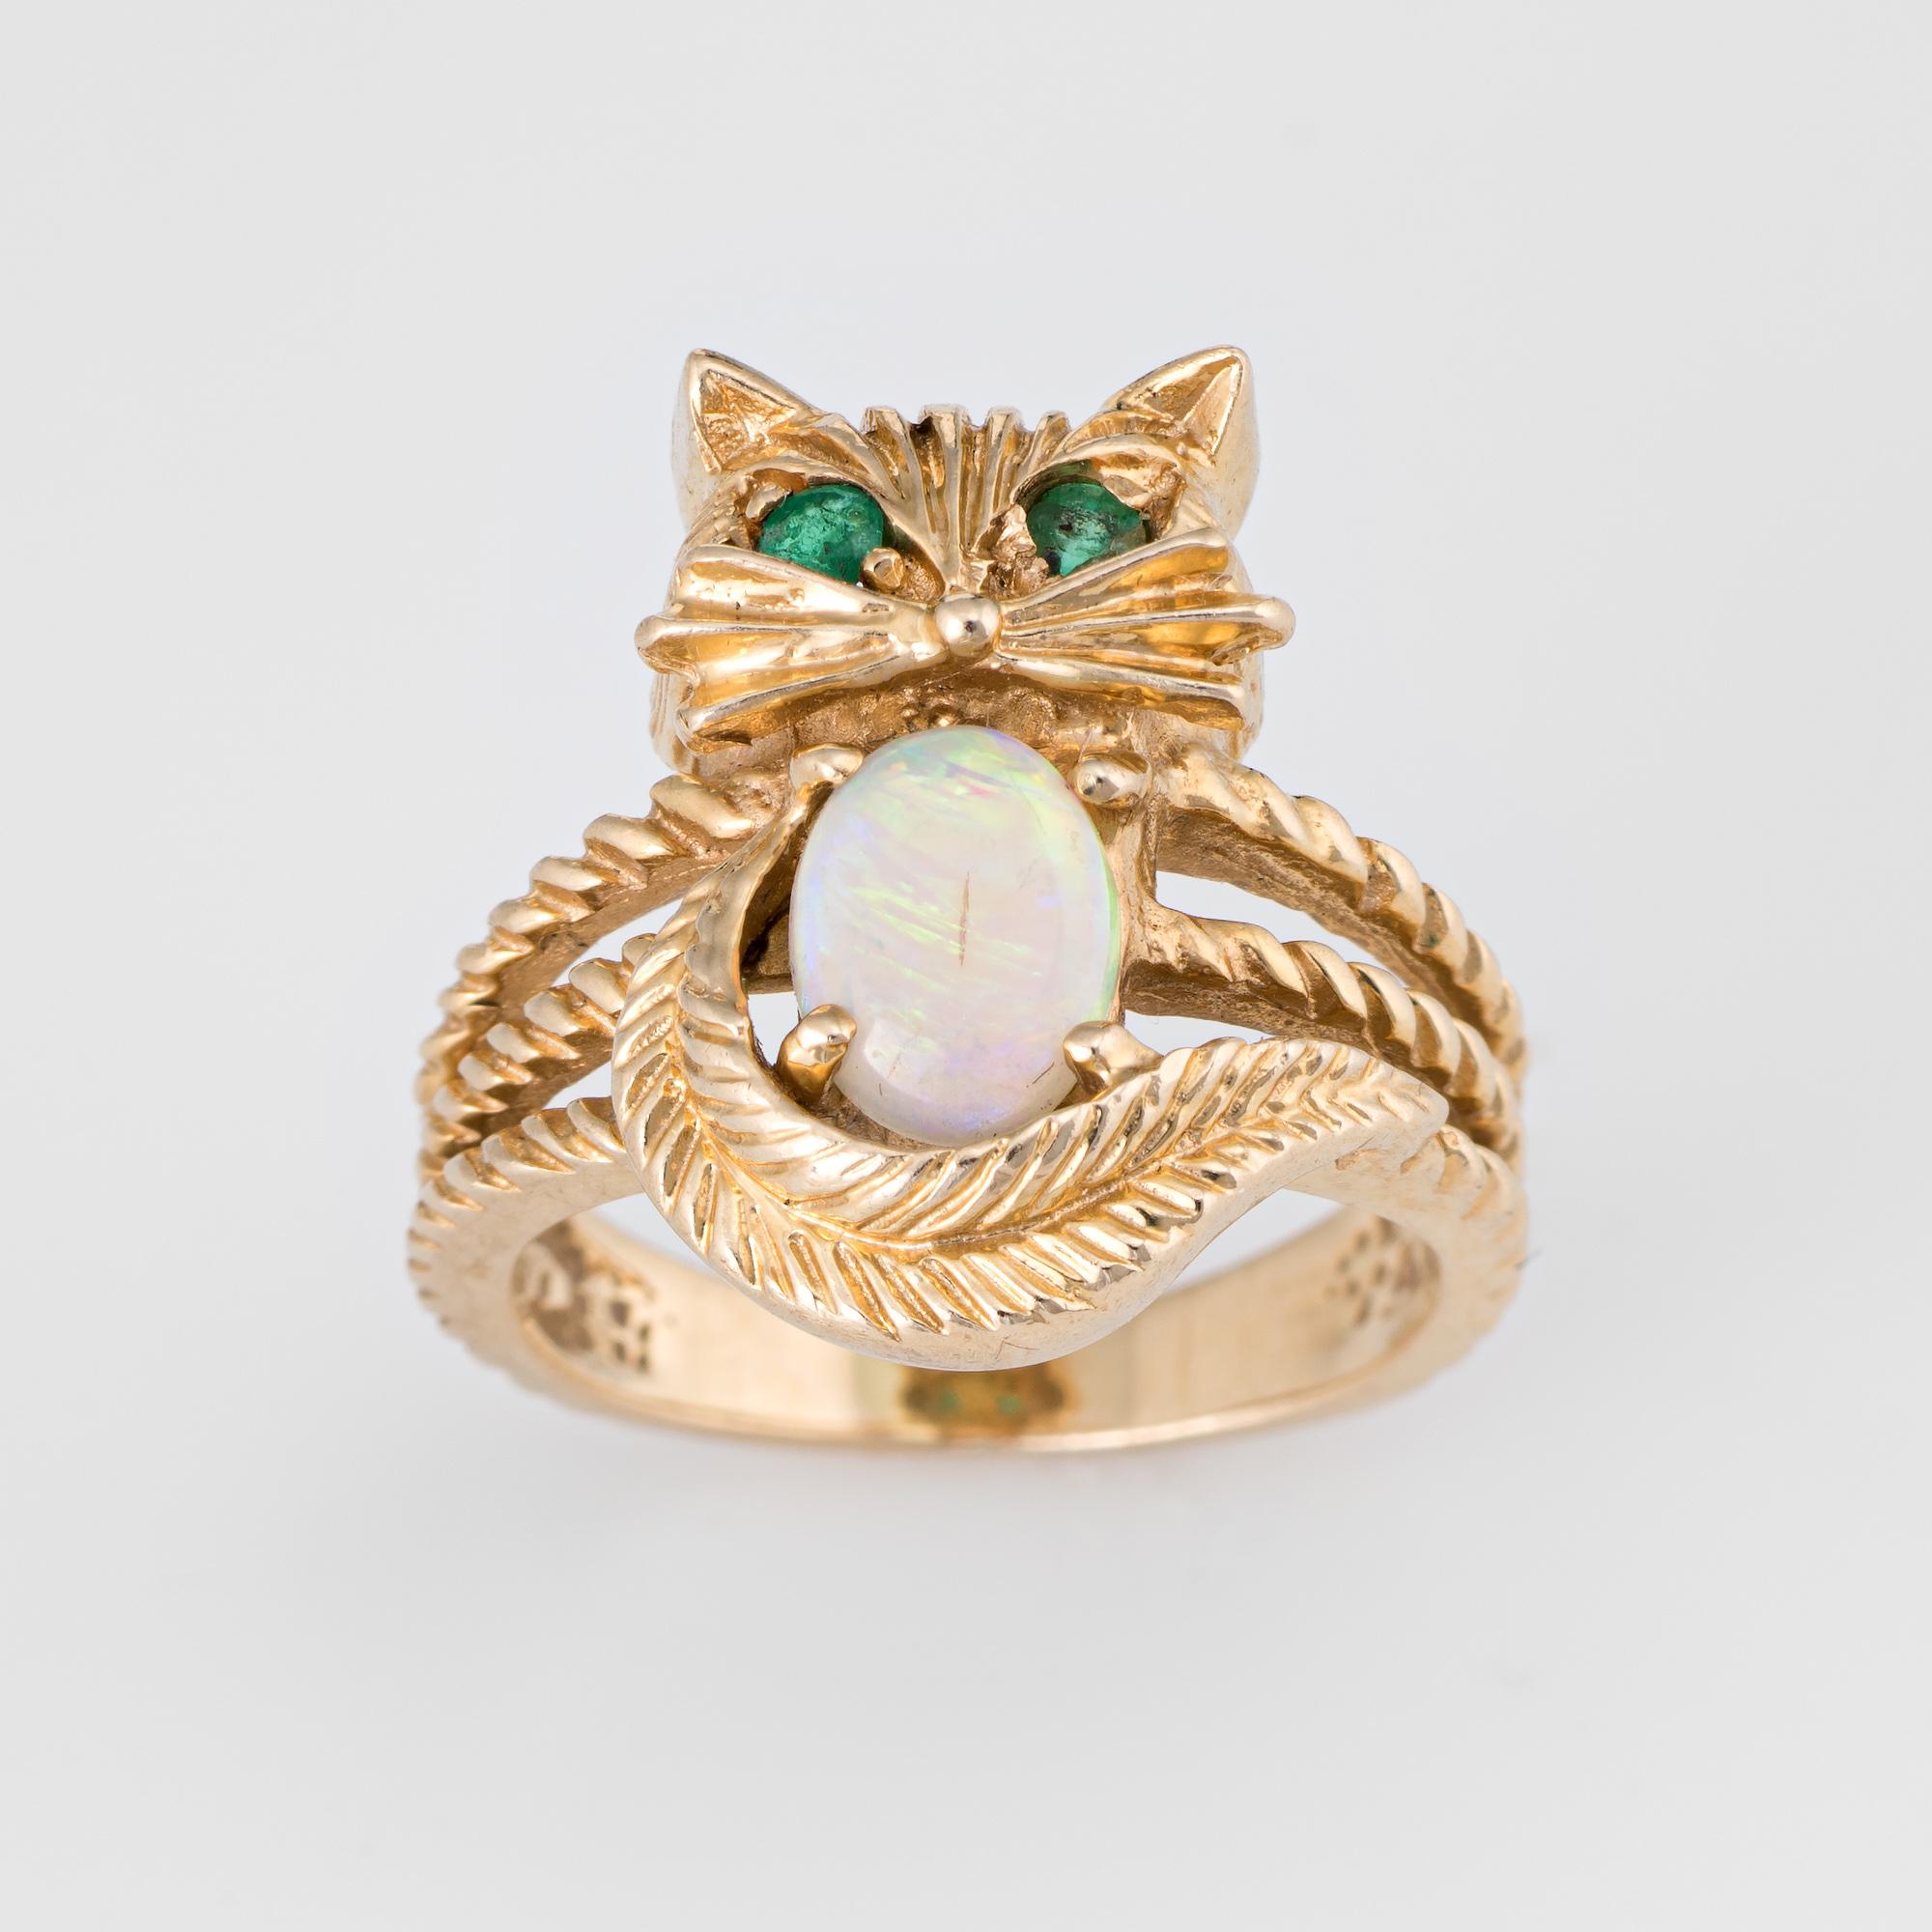 Stylish vintage opal & emerald kitty cat ring crafted in 14 karat yellow gold. 

Cabochon cut natural opal measures 7mm x 5mm (estimated at 1 carat), accented with 2 estimated 0.01 carat emeralds (estimated at .02 carats). The opal is in excellent